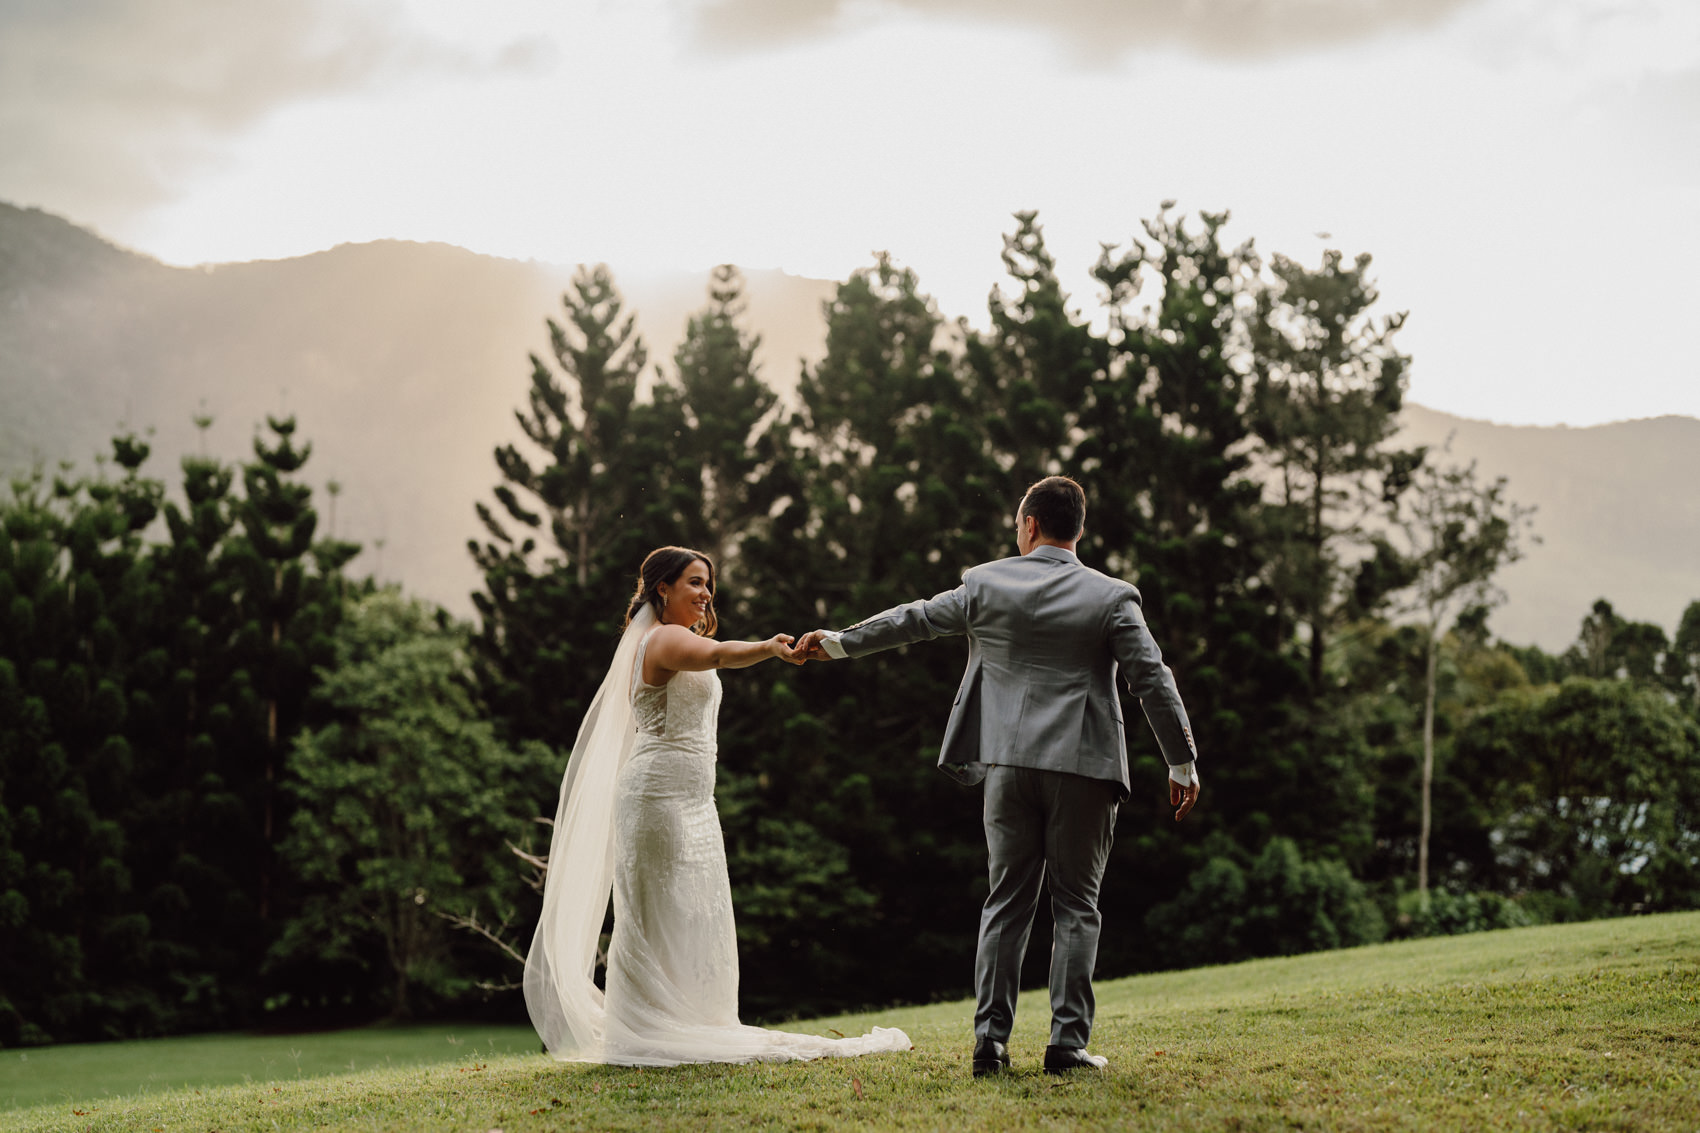 Melissa and Aiden's Bower Estate Wedding Sunset Portraits with Mountains in Bacground